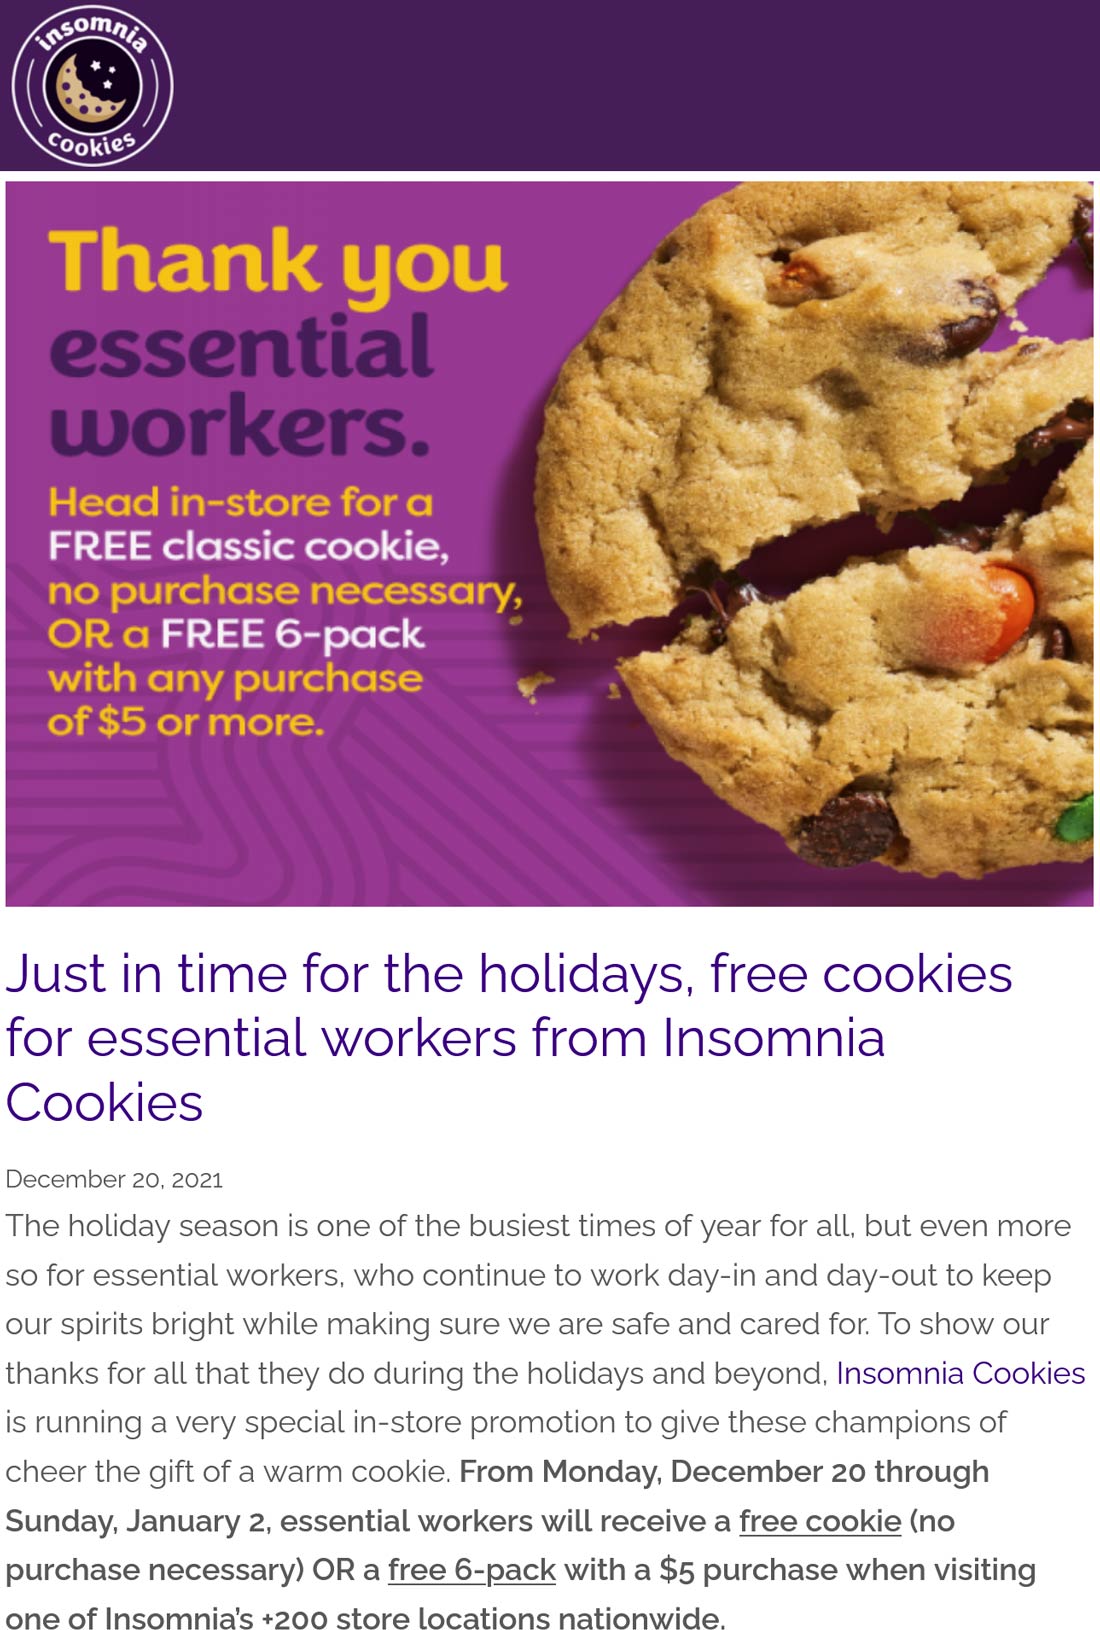 Insomnia Cookies stores Coupon  Essential workers score free cookies at Insomnia Cookies no purchase necessary #insomniacookies 